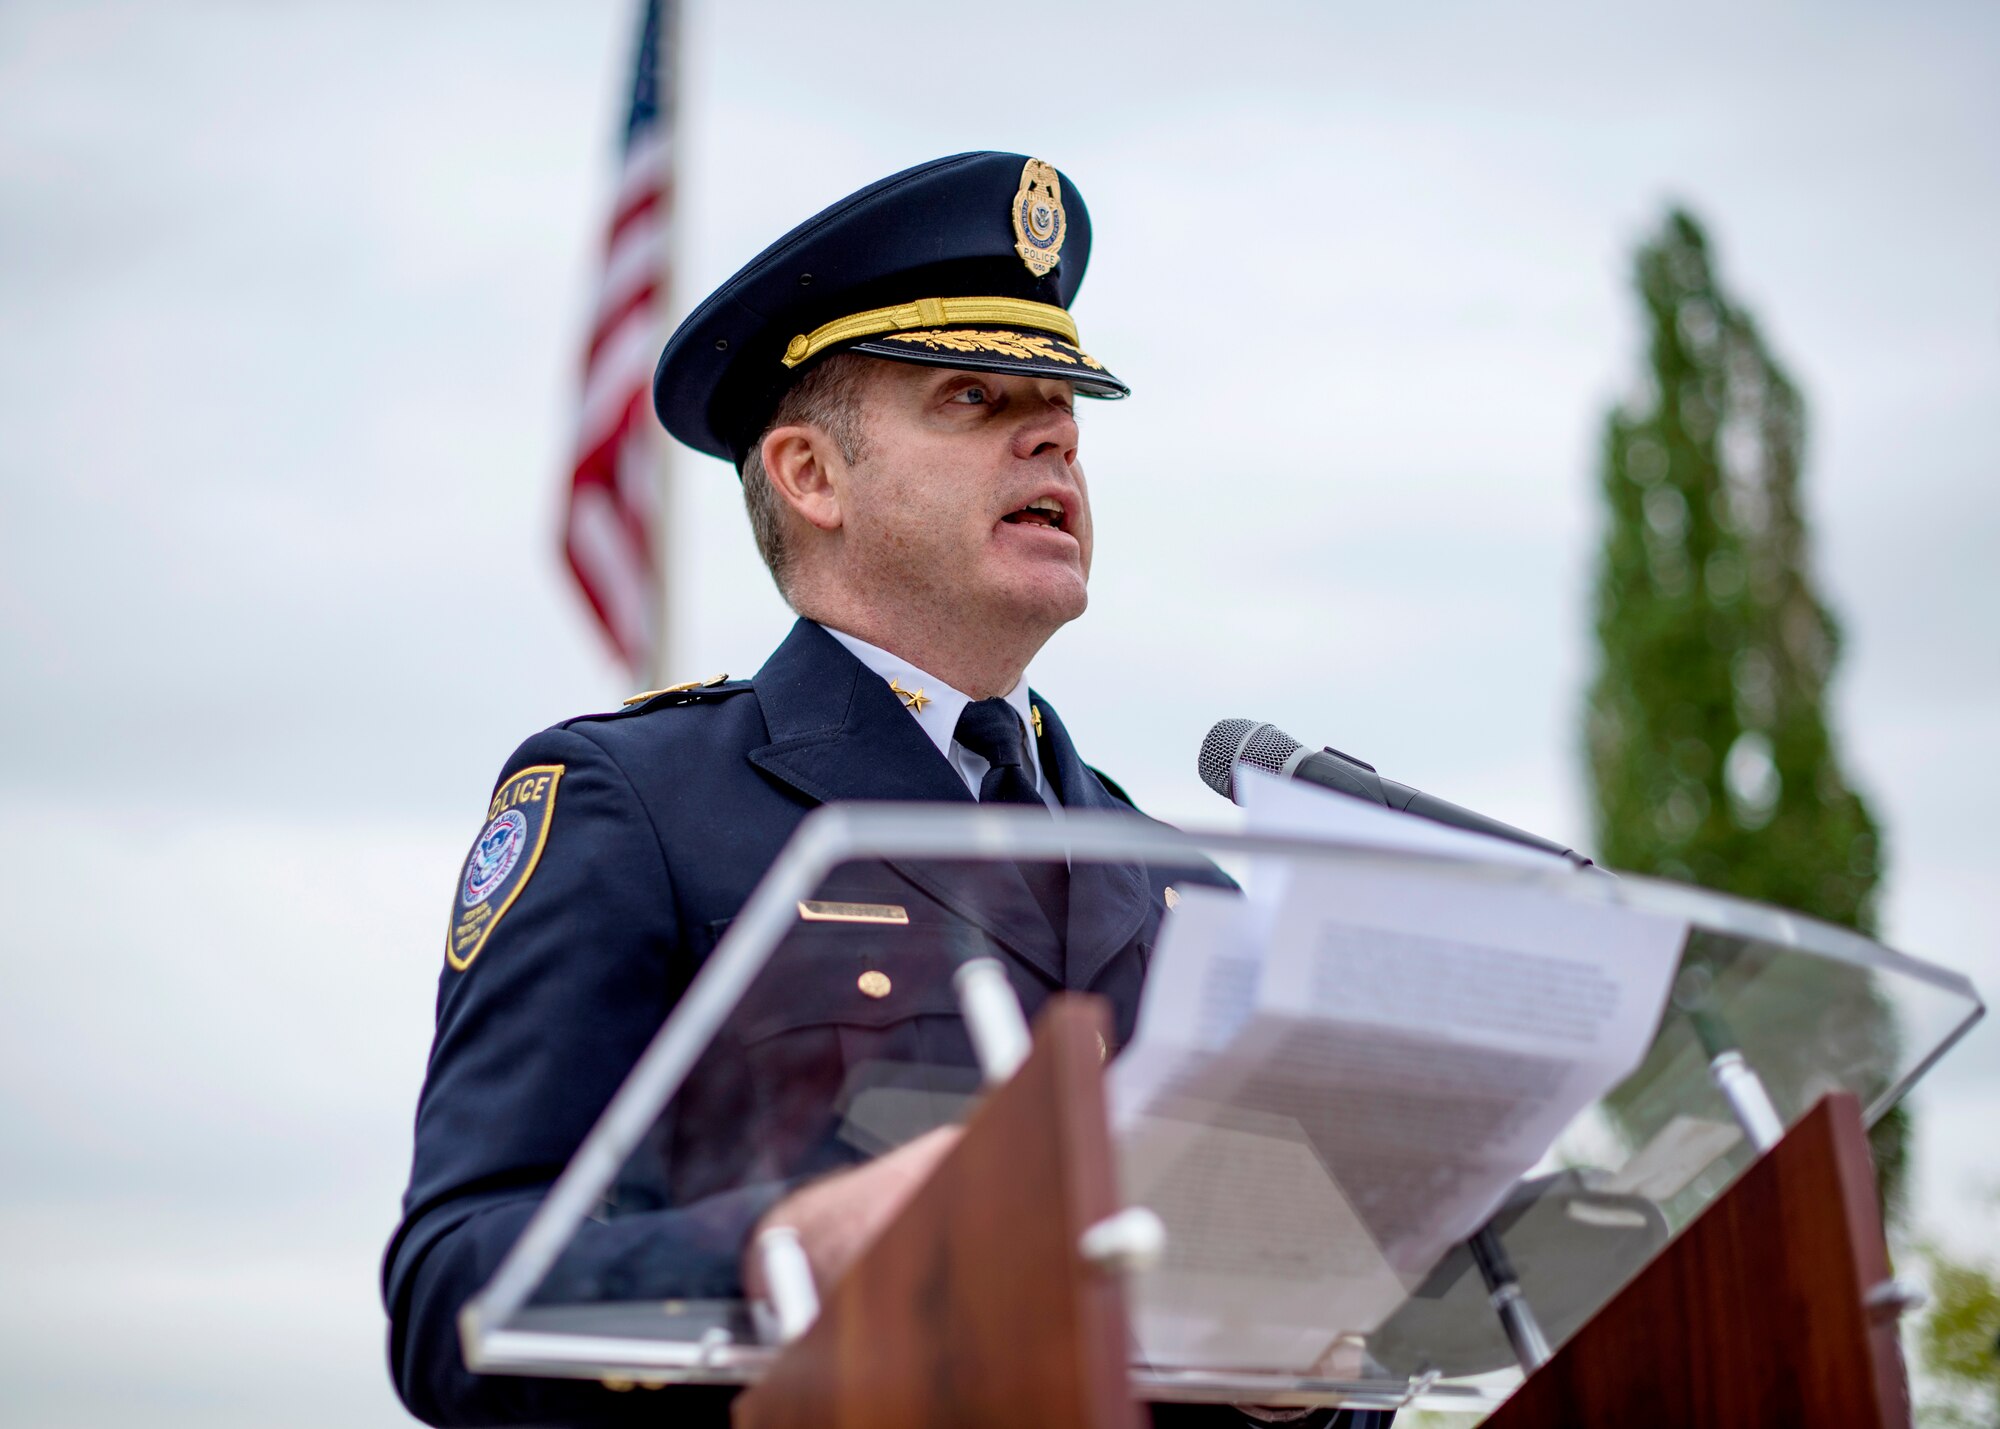 Gabriel Russell, Pacific Northwest Arctic Region Federal Protective Service regional director, speaks about the importance of Police Week during a National Police Week Memorial Retreat Ceremony at Fairchild Air Force Base, Washington, May 15, 2019. Police Week is a chance for all law enforcement officials and affiliating agencies to pay respects to the officers that came before them. (U.S. Air Force photo by Airman 1st Class Whitney Laine)